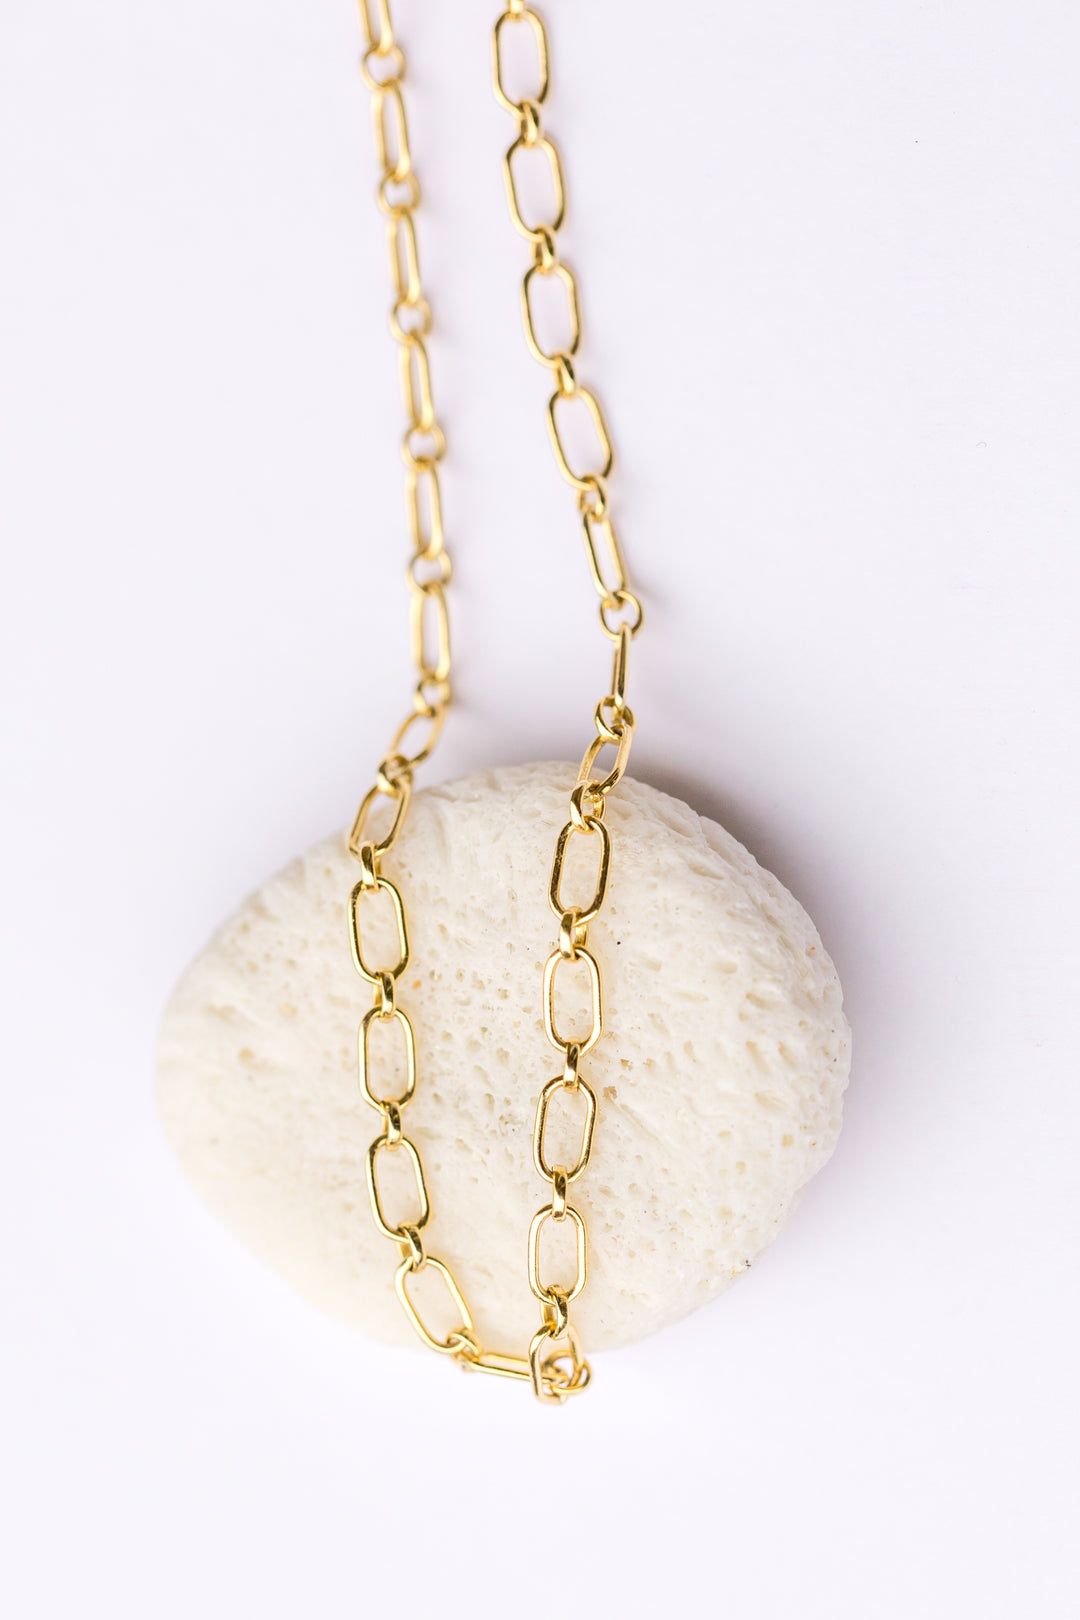 Gold Delicate Chain Necklace by Anna Shae Jewelry in Lexington, Kentucky 